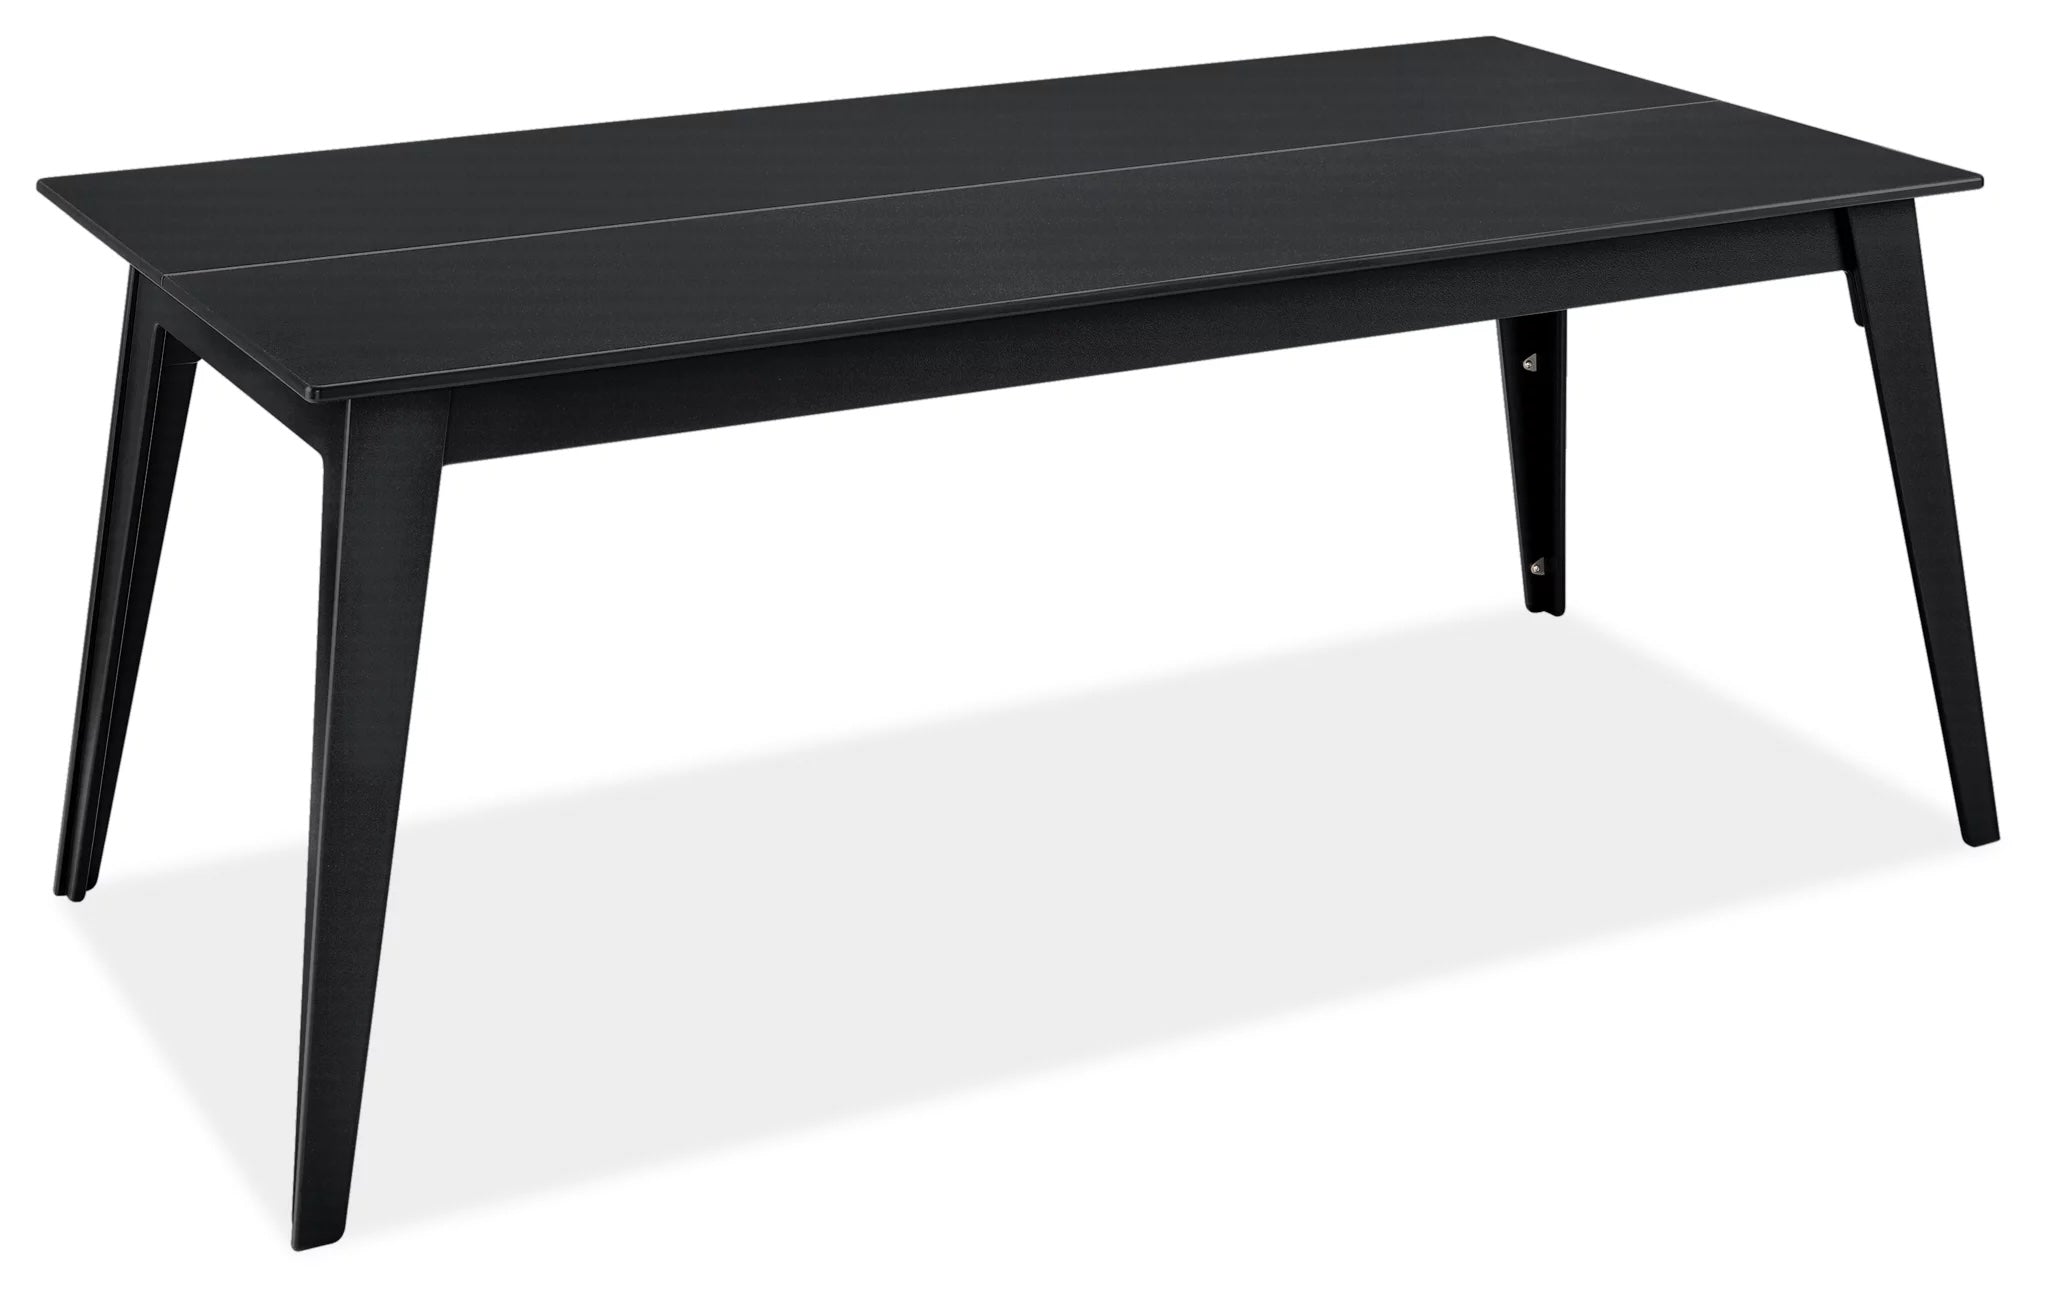 80" x 40" Dining Table, Employee Sale